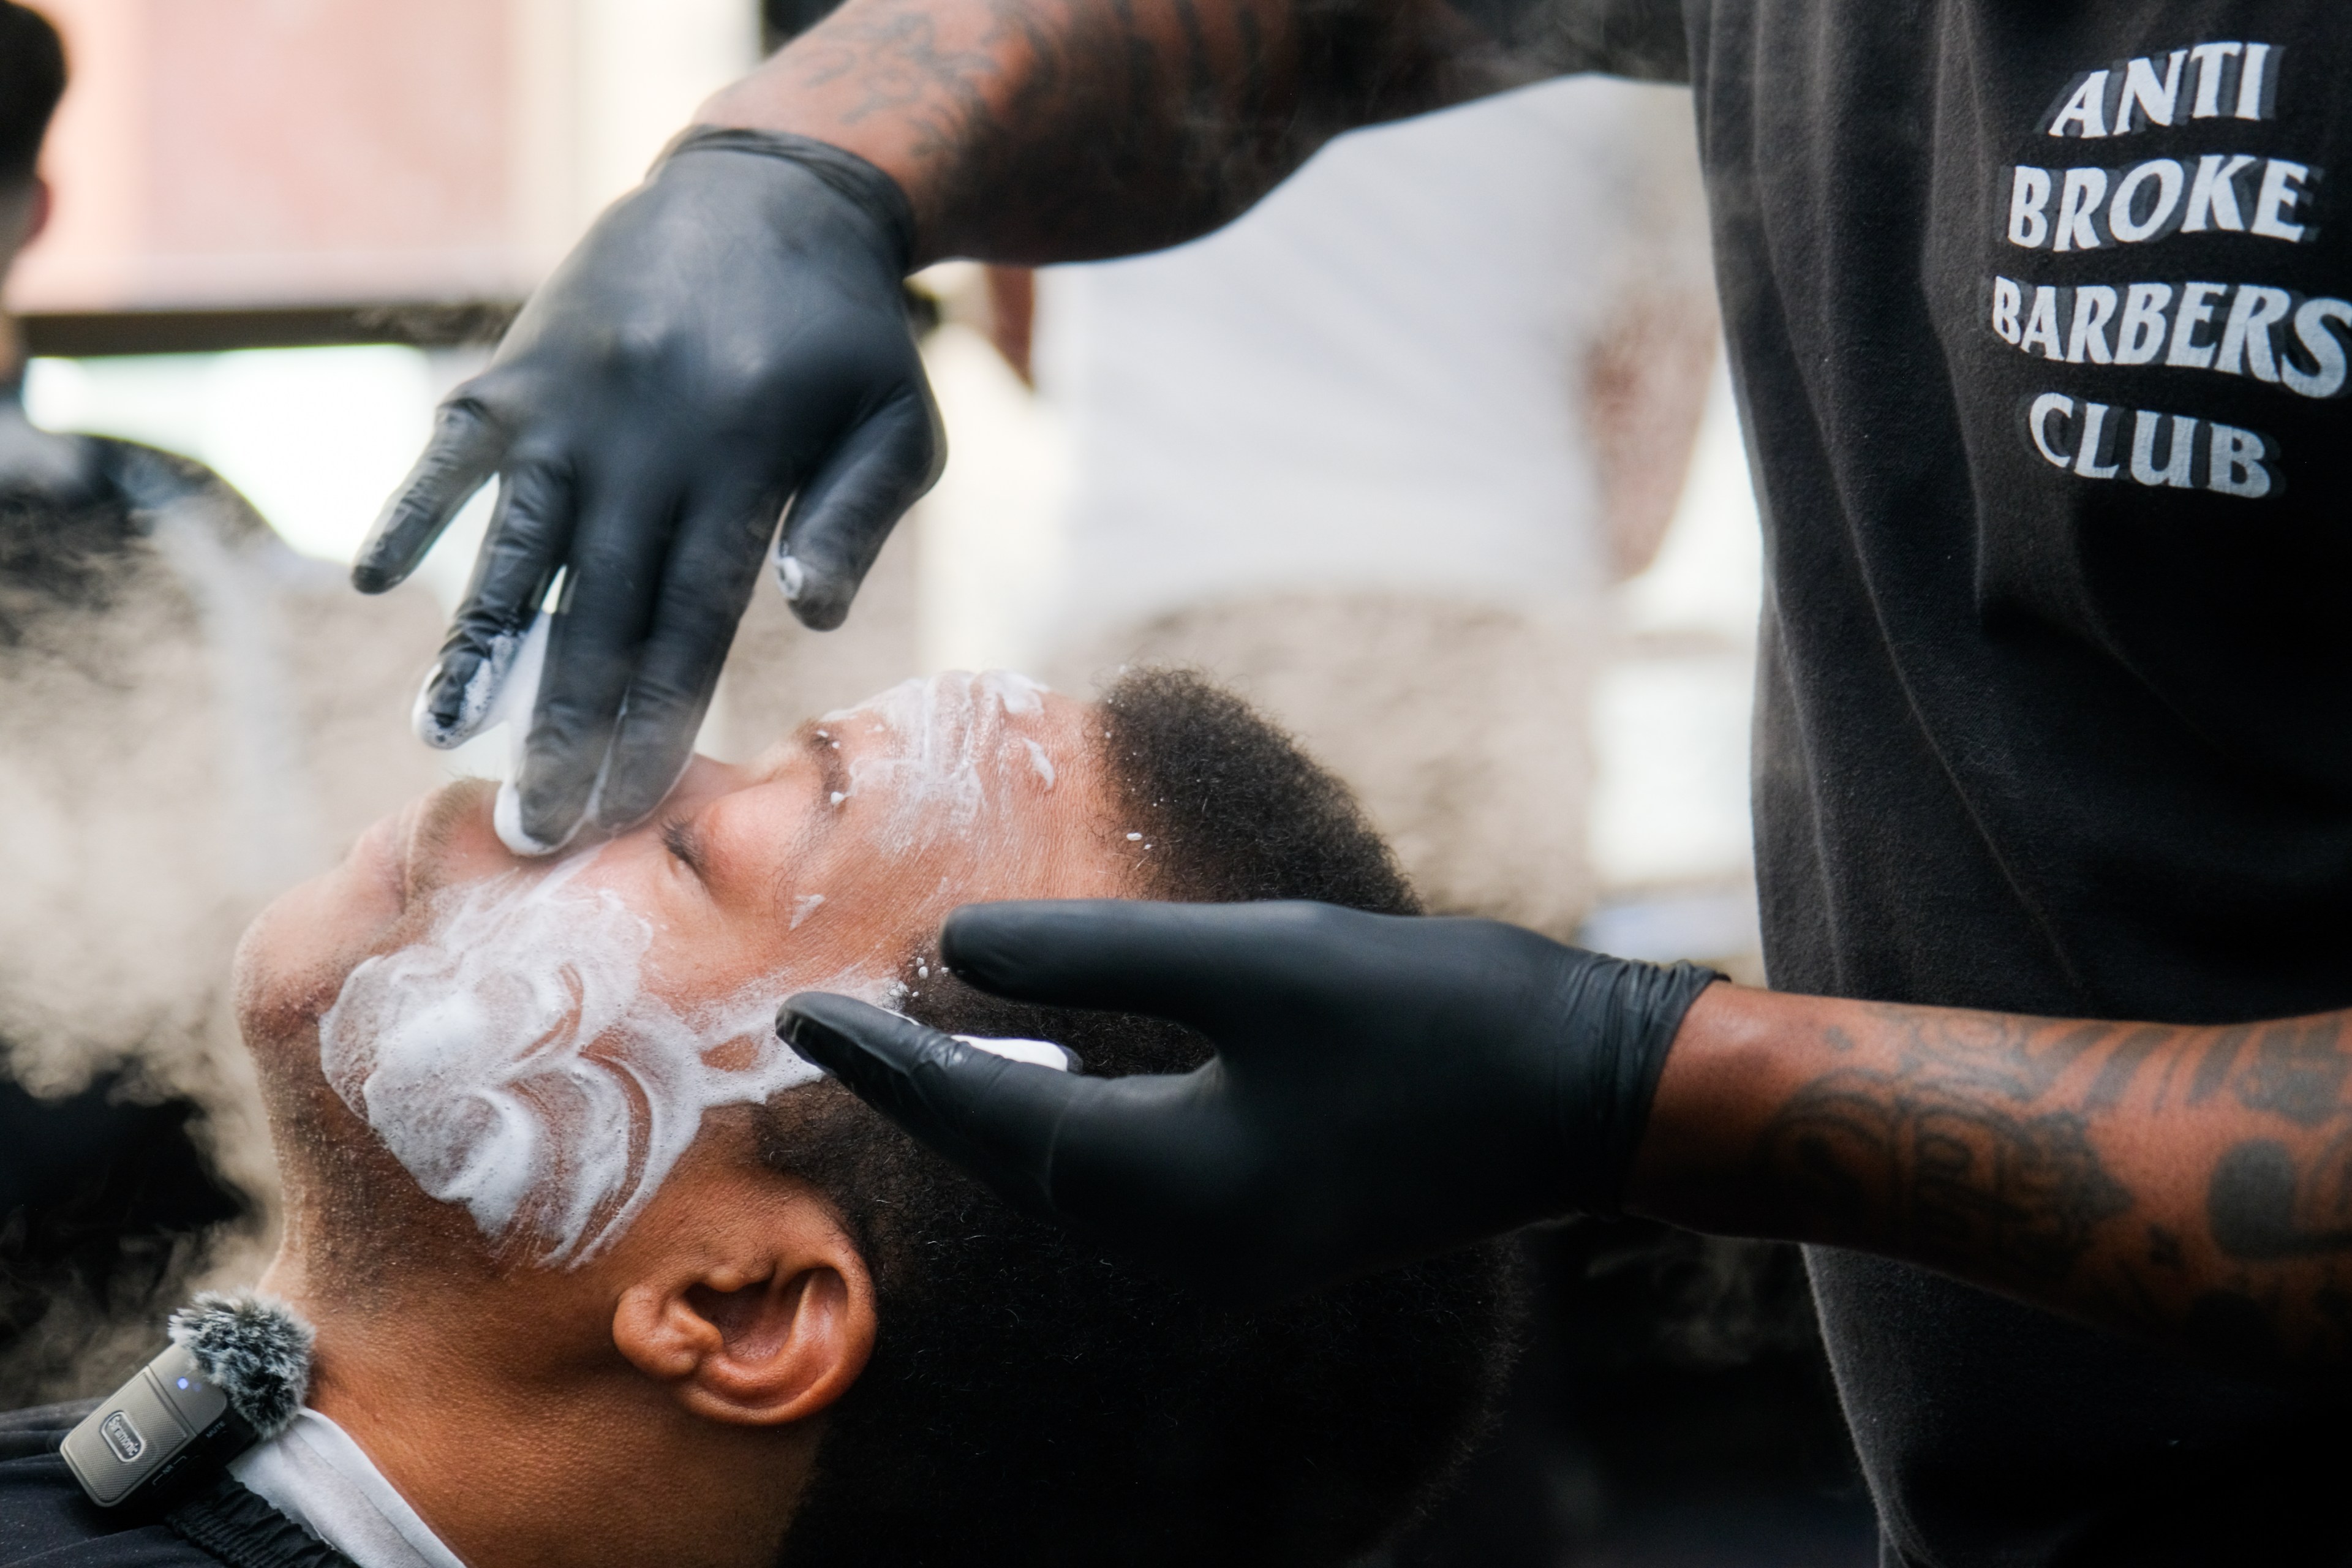 A barber wearing gloves applies shaving cream to a reclined customer's face.